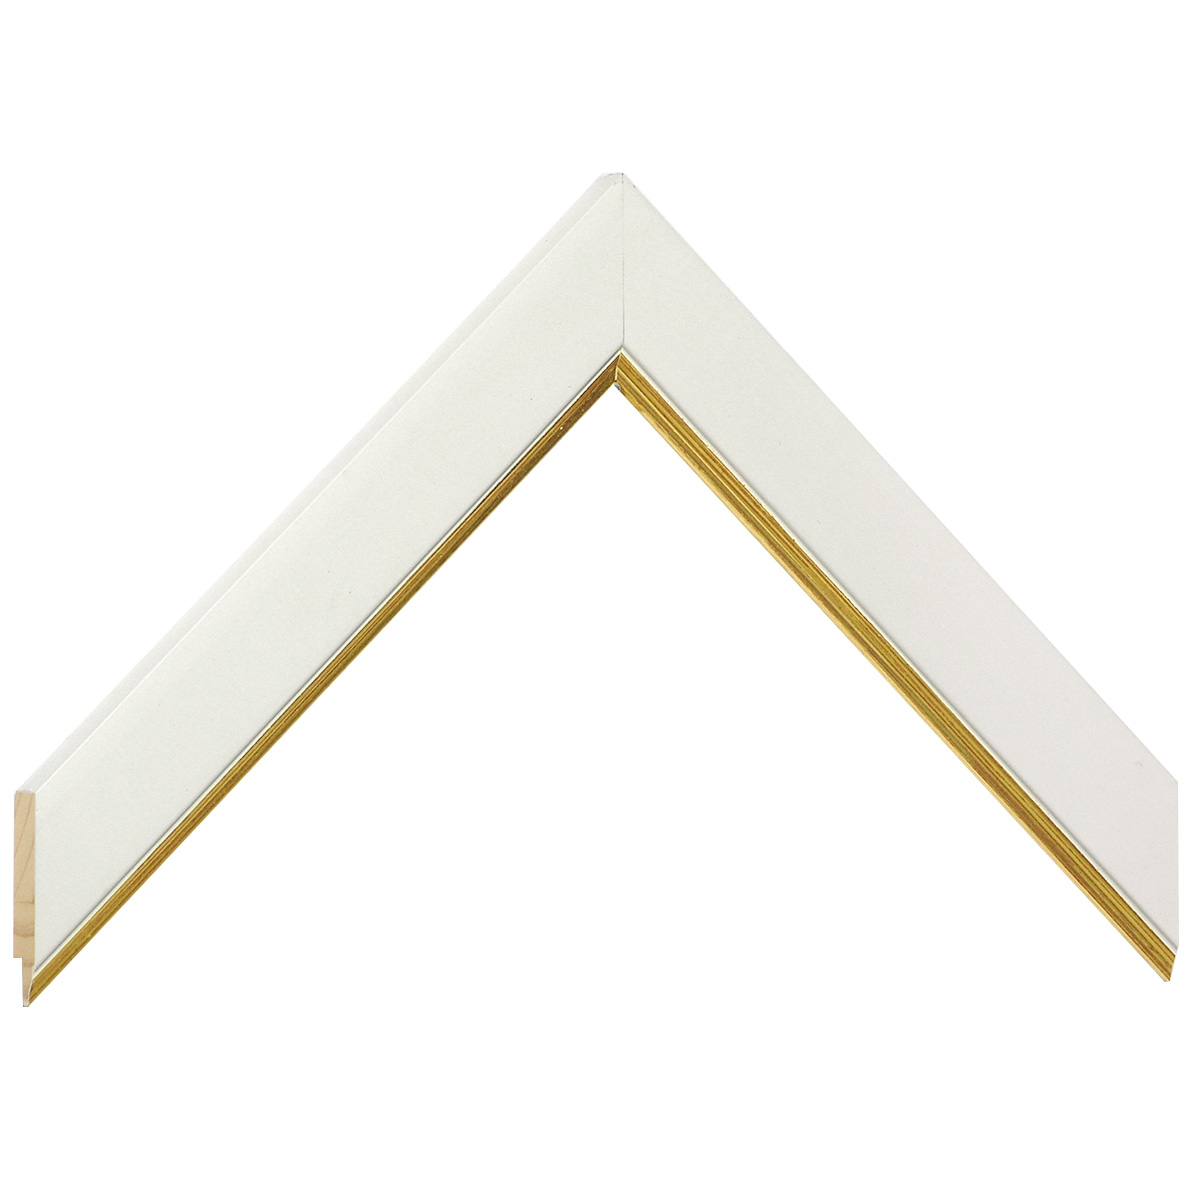 Liner ayous jointed 25mm - flat, white, gold edge - Sample